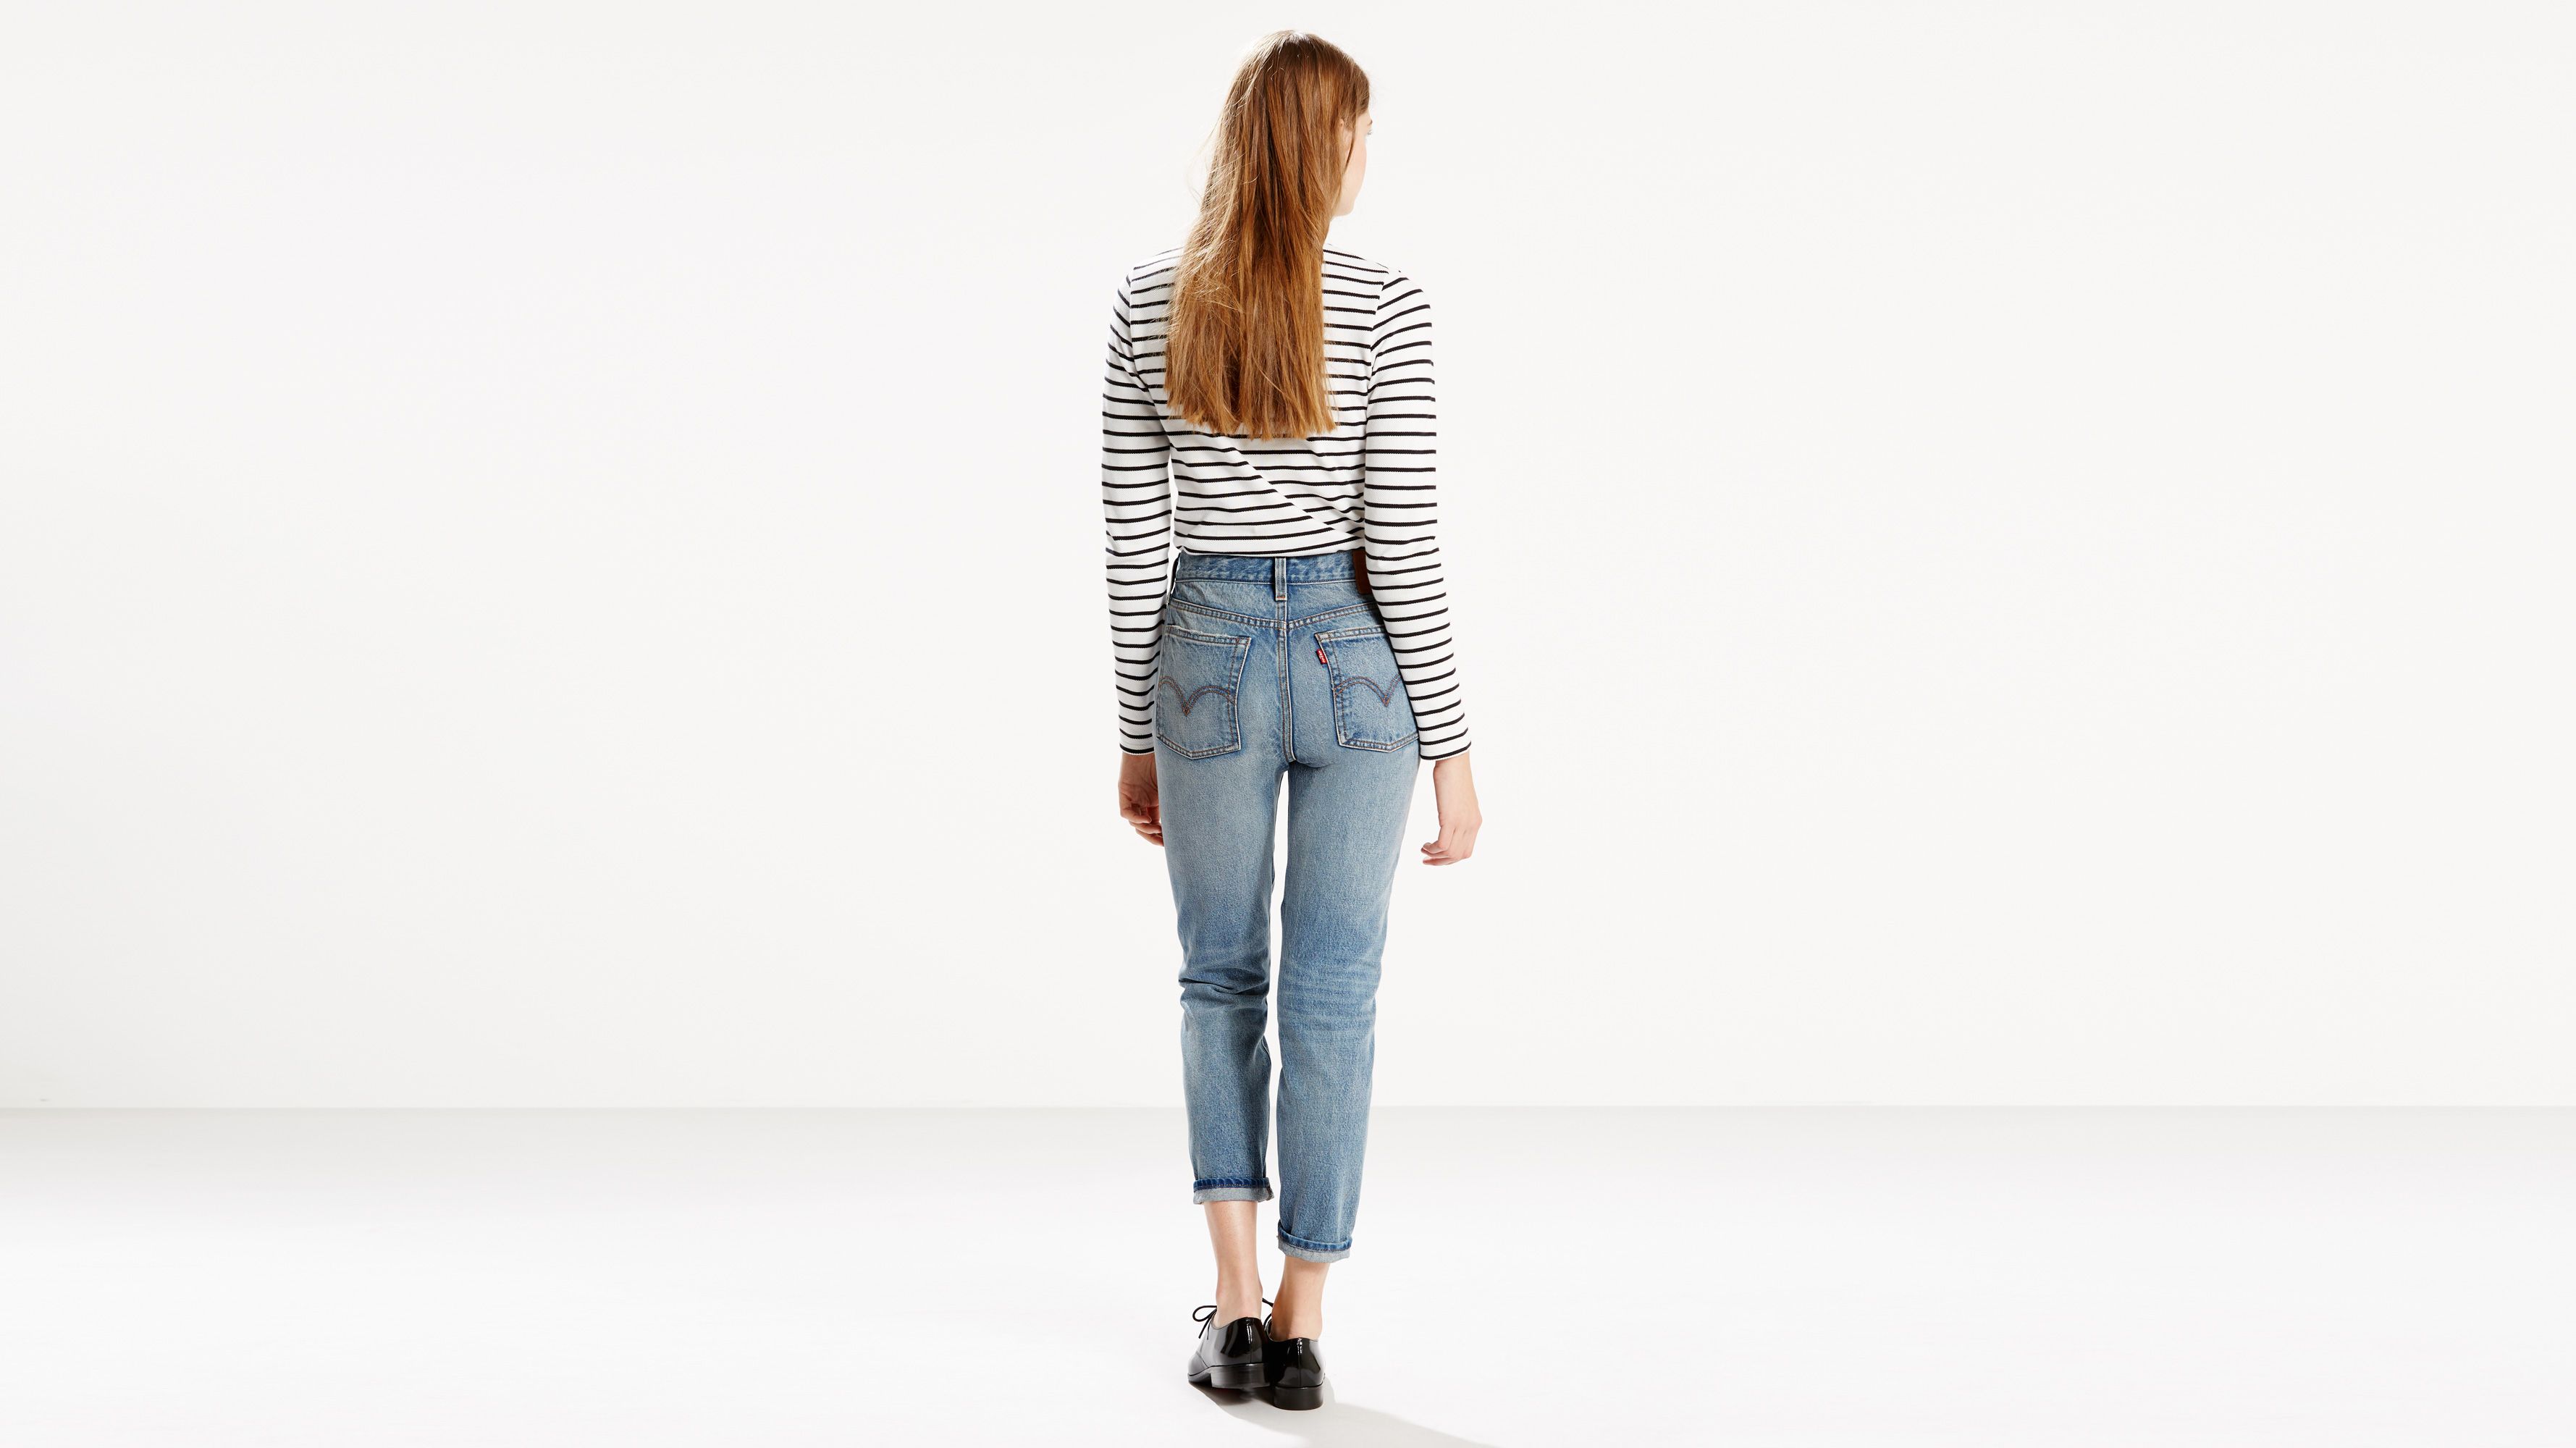 These new jeans give you a wedgie, and people are loving them